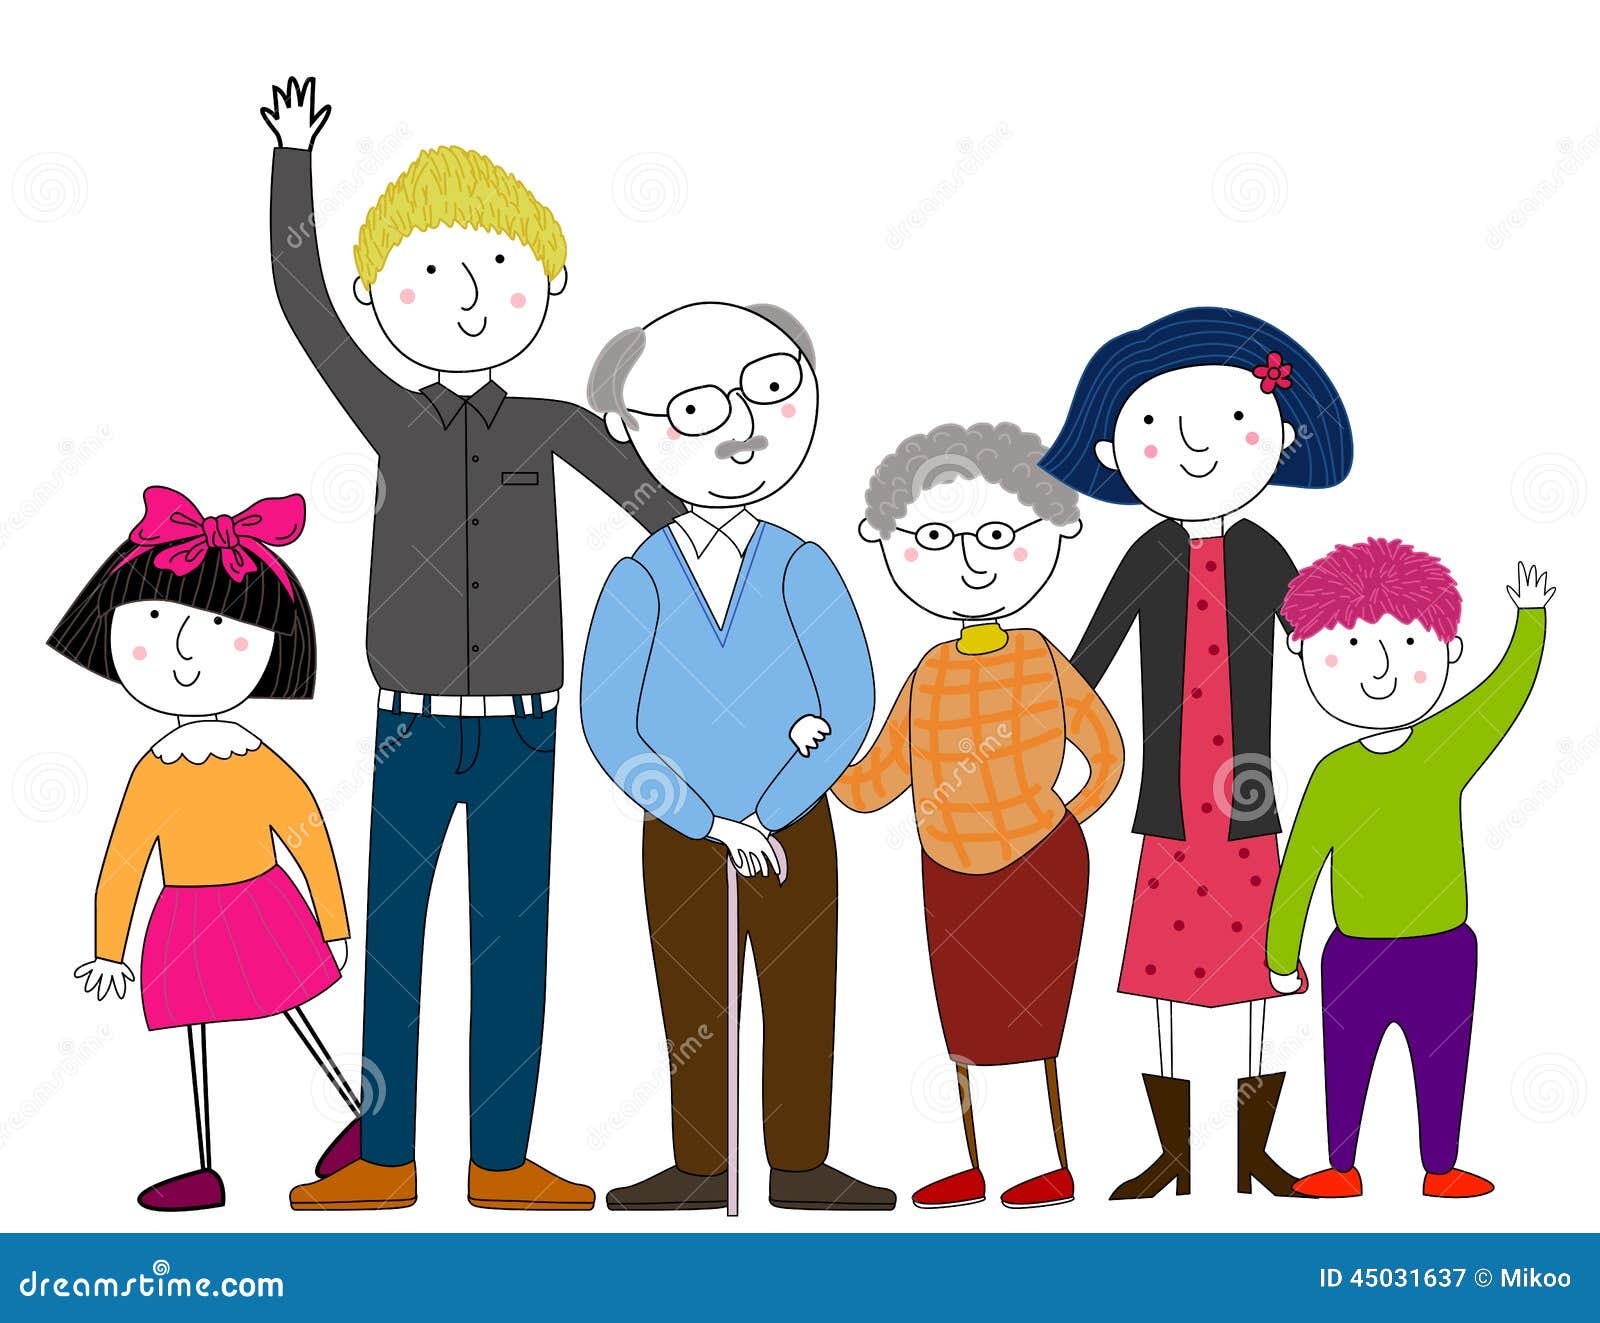 clipart of big family - photo #14